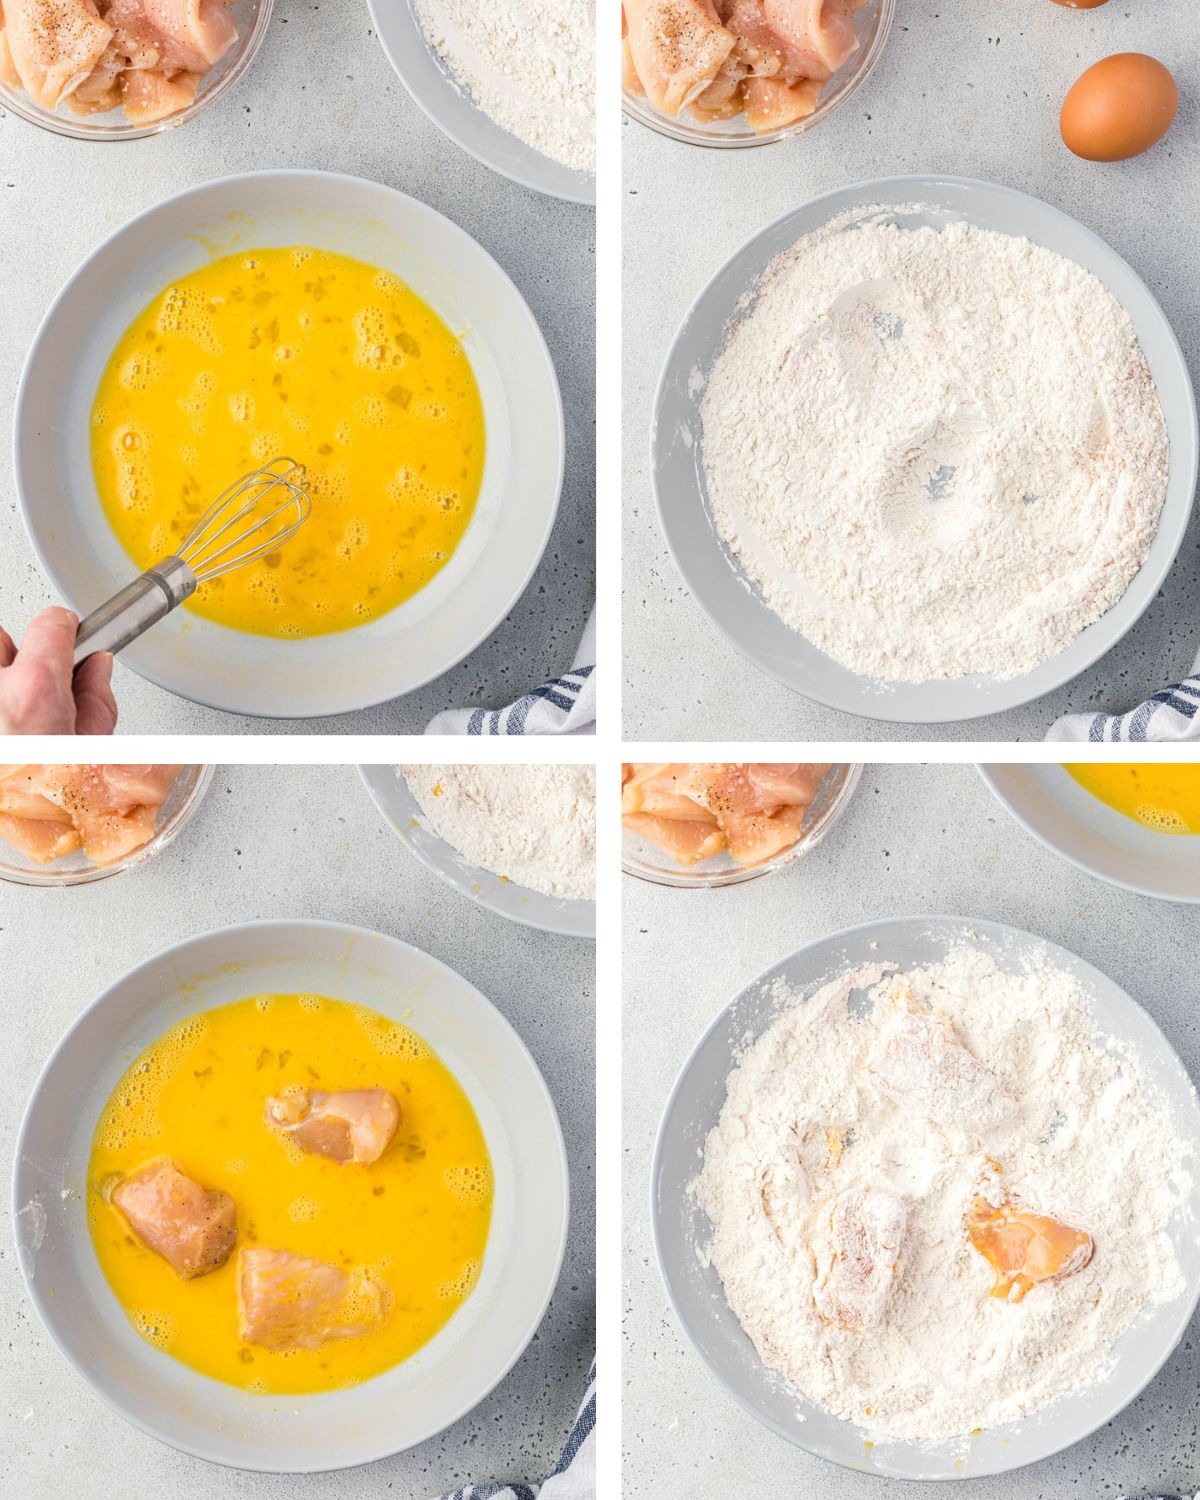 4 images showing breading station and chicken coated in eggs next to a bowl of chicken coated in flour.